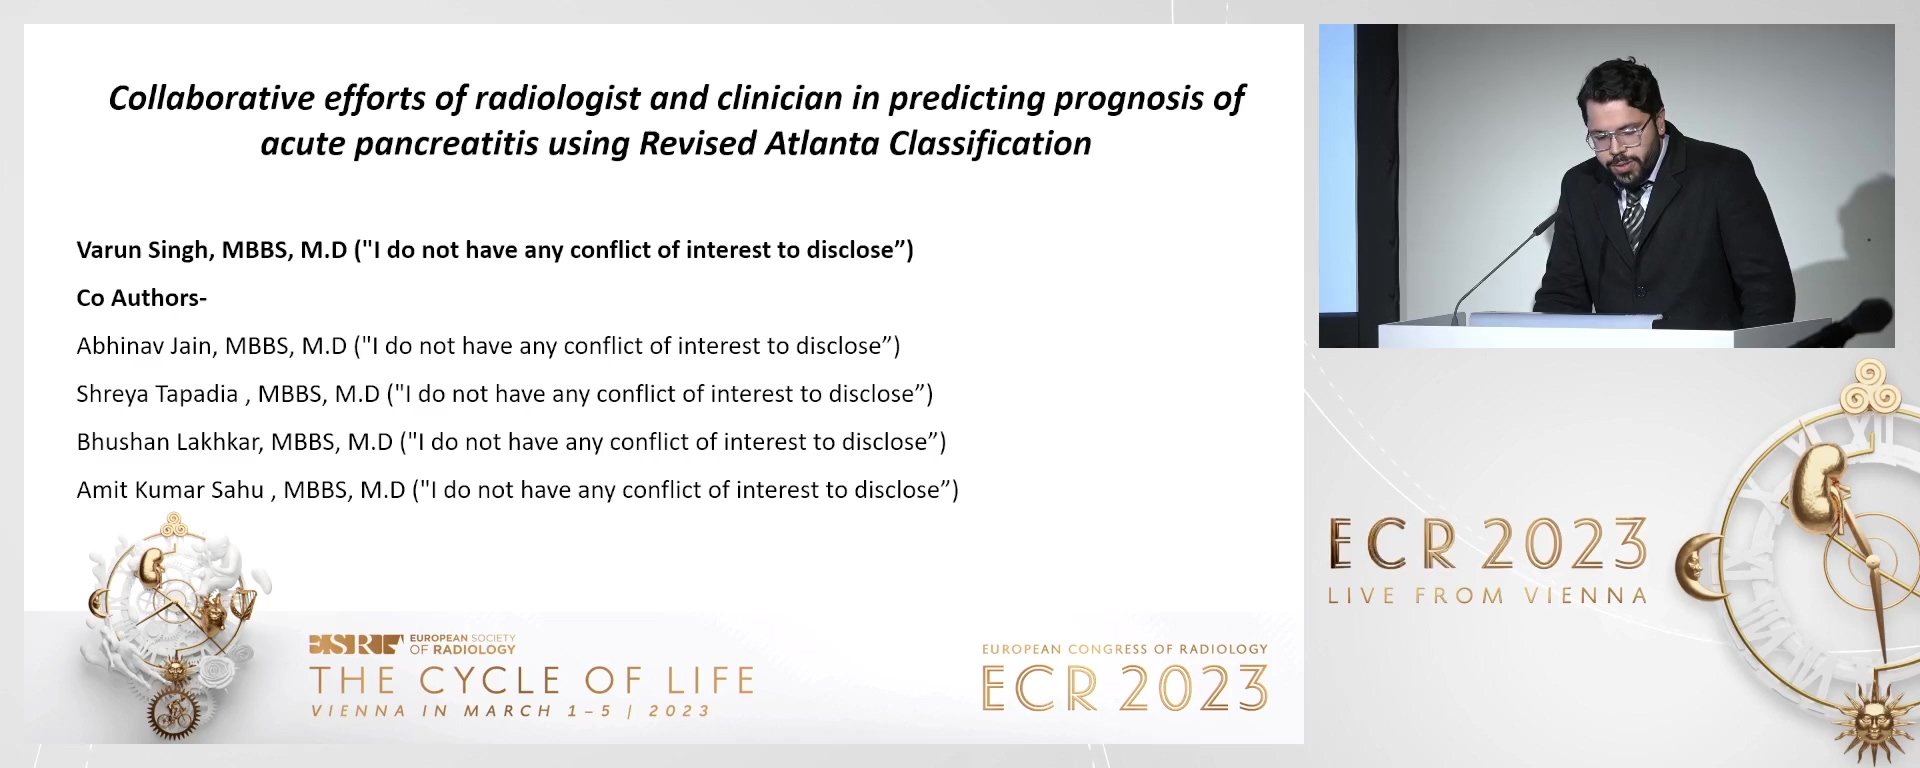 Collaborative efforts of radiologist and clinician in predicting prognosis of acute pancreatitis using revised Atlanta classification